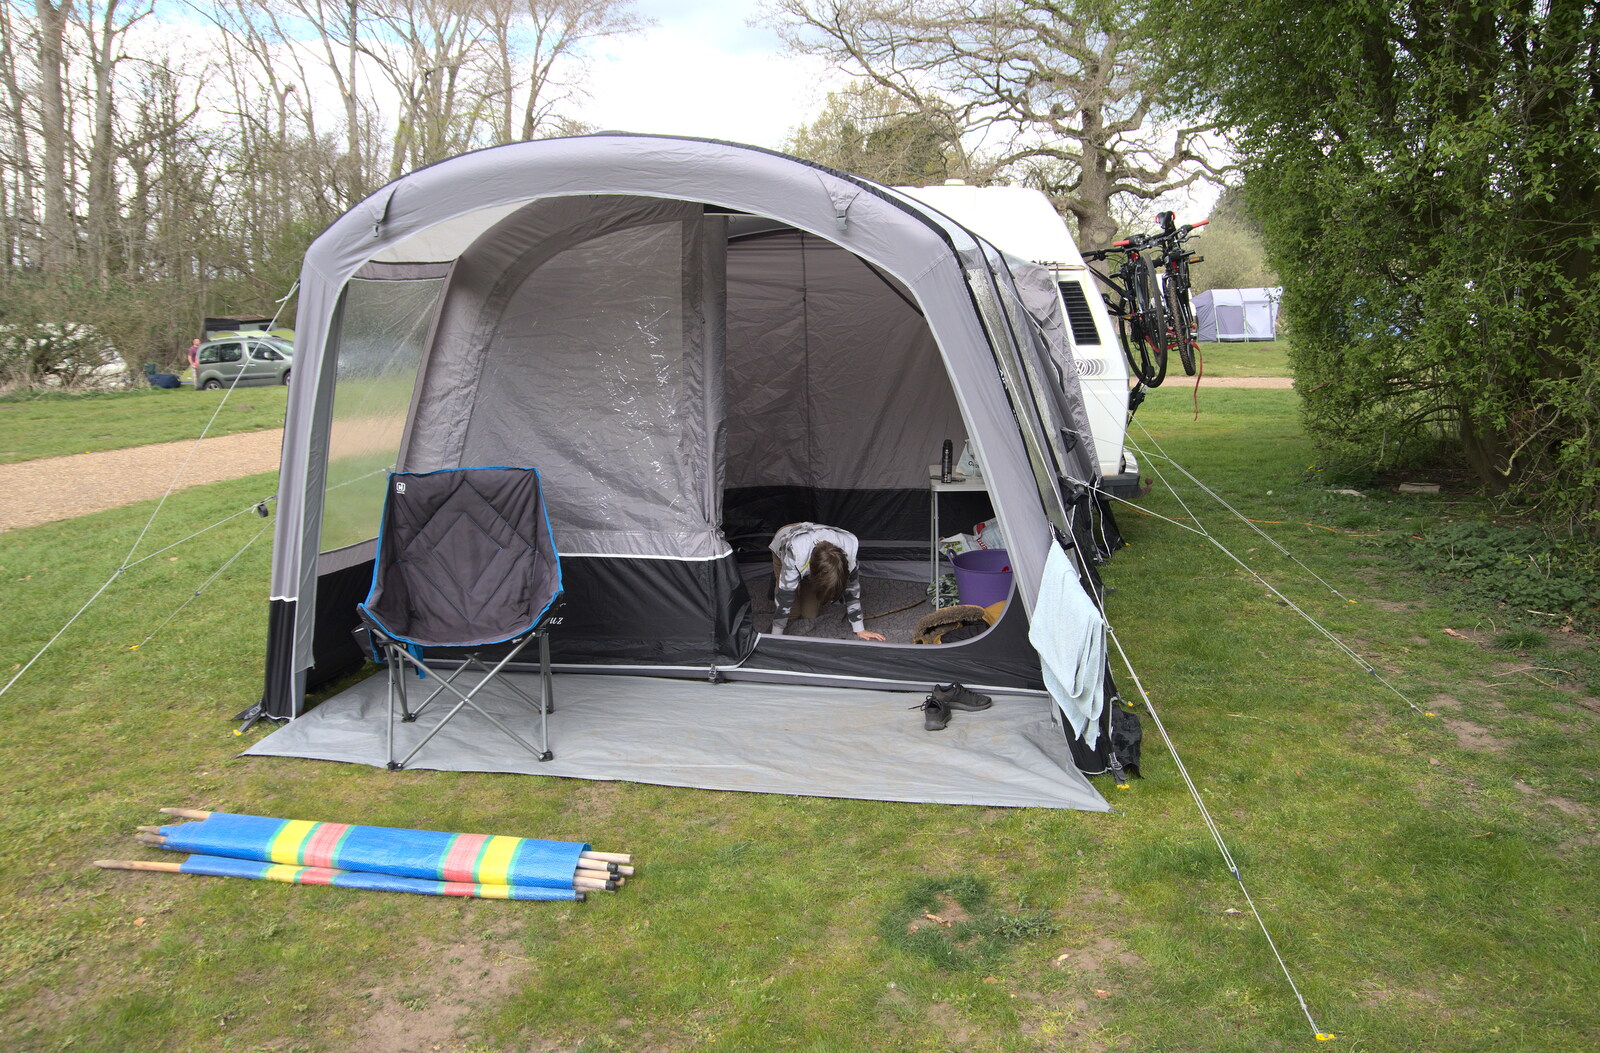 A Camper-Van Trip, West Harling, Norfolk - 13th April 2022: Harry pokes about in the awning